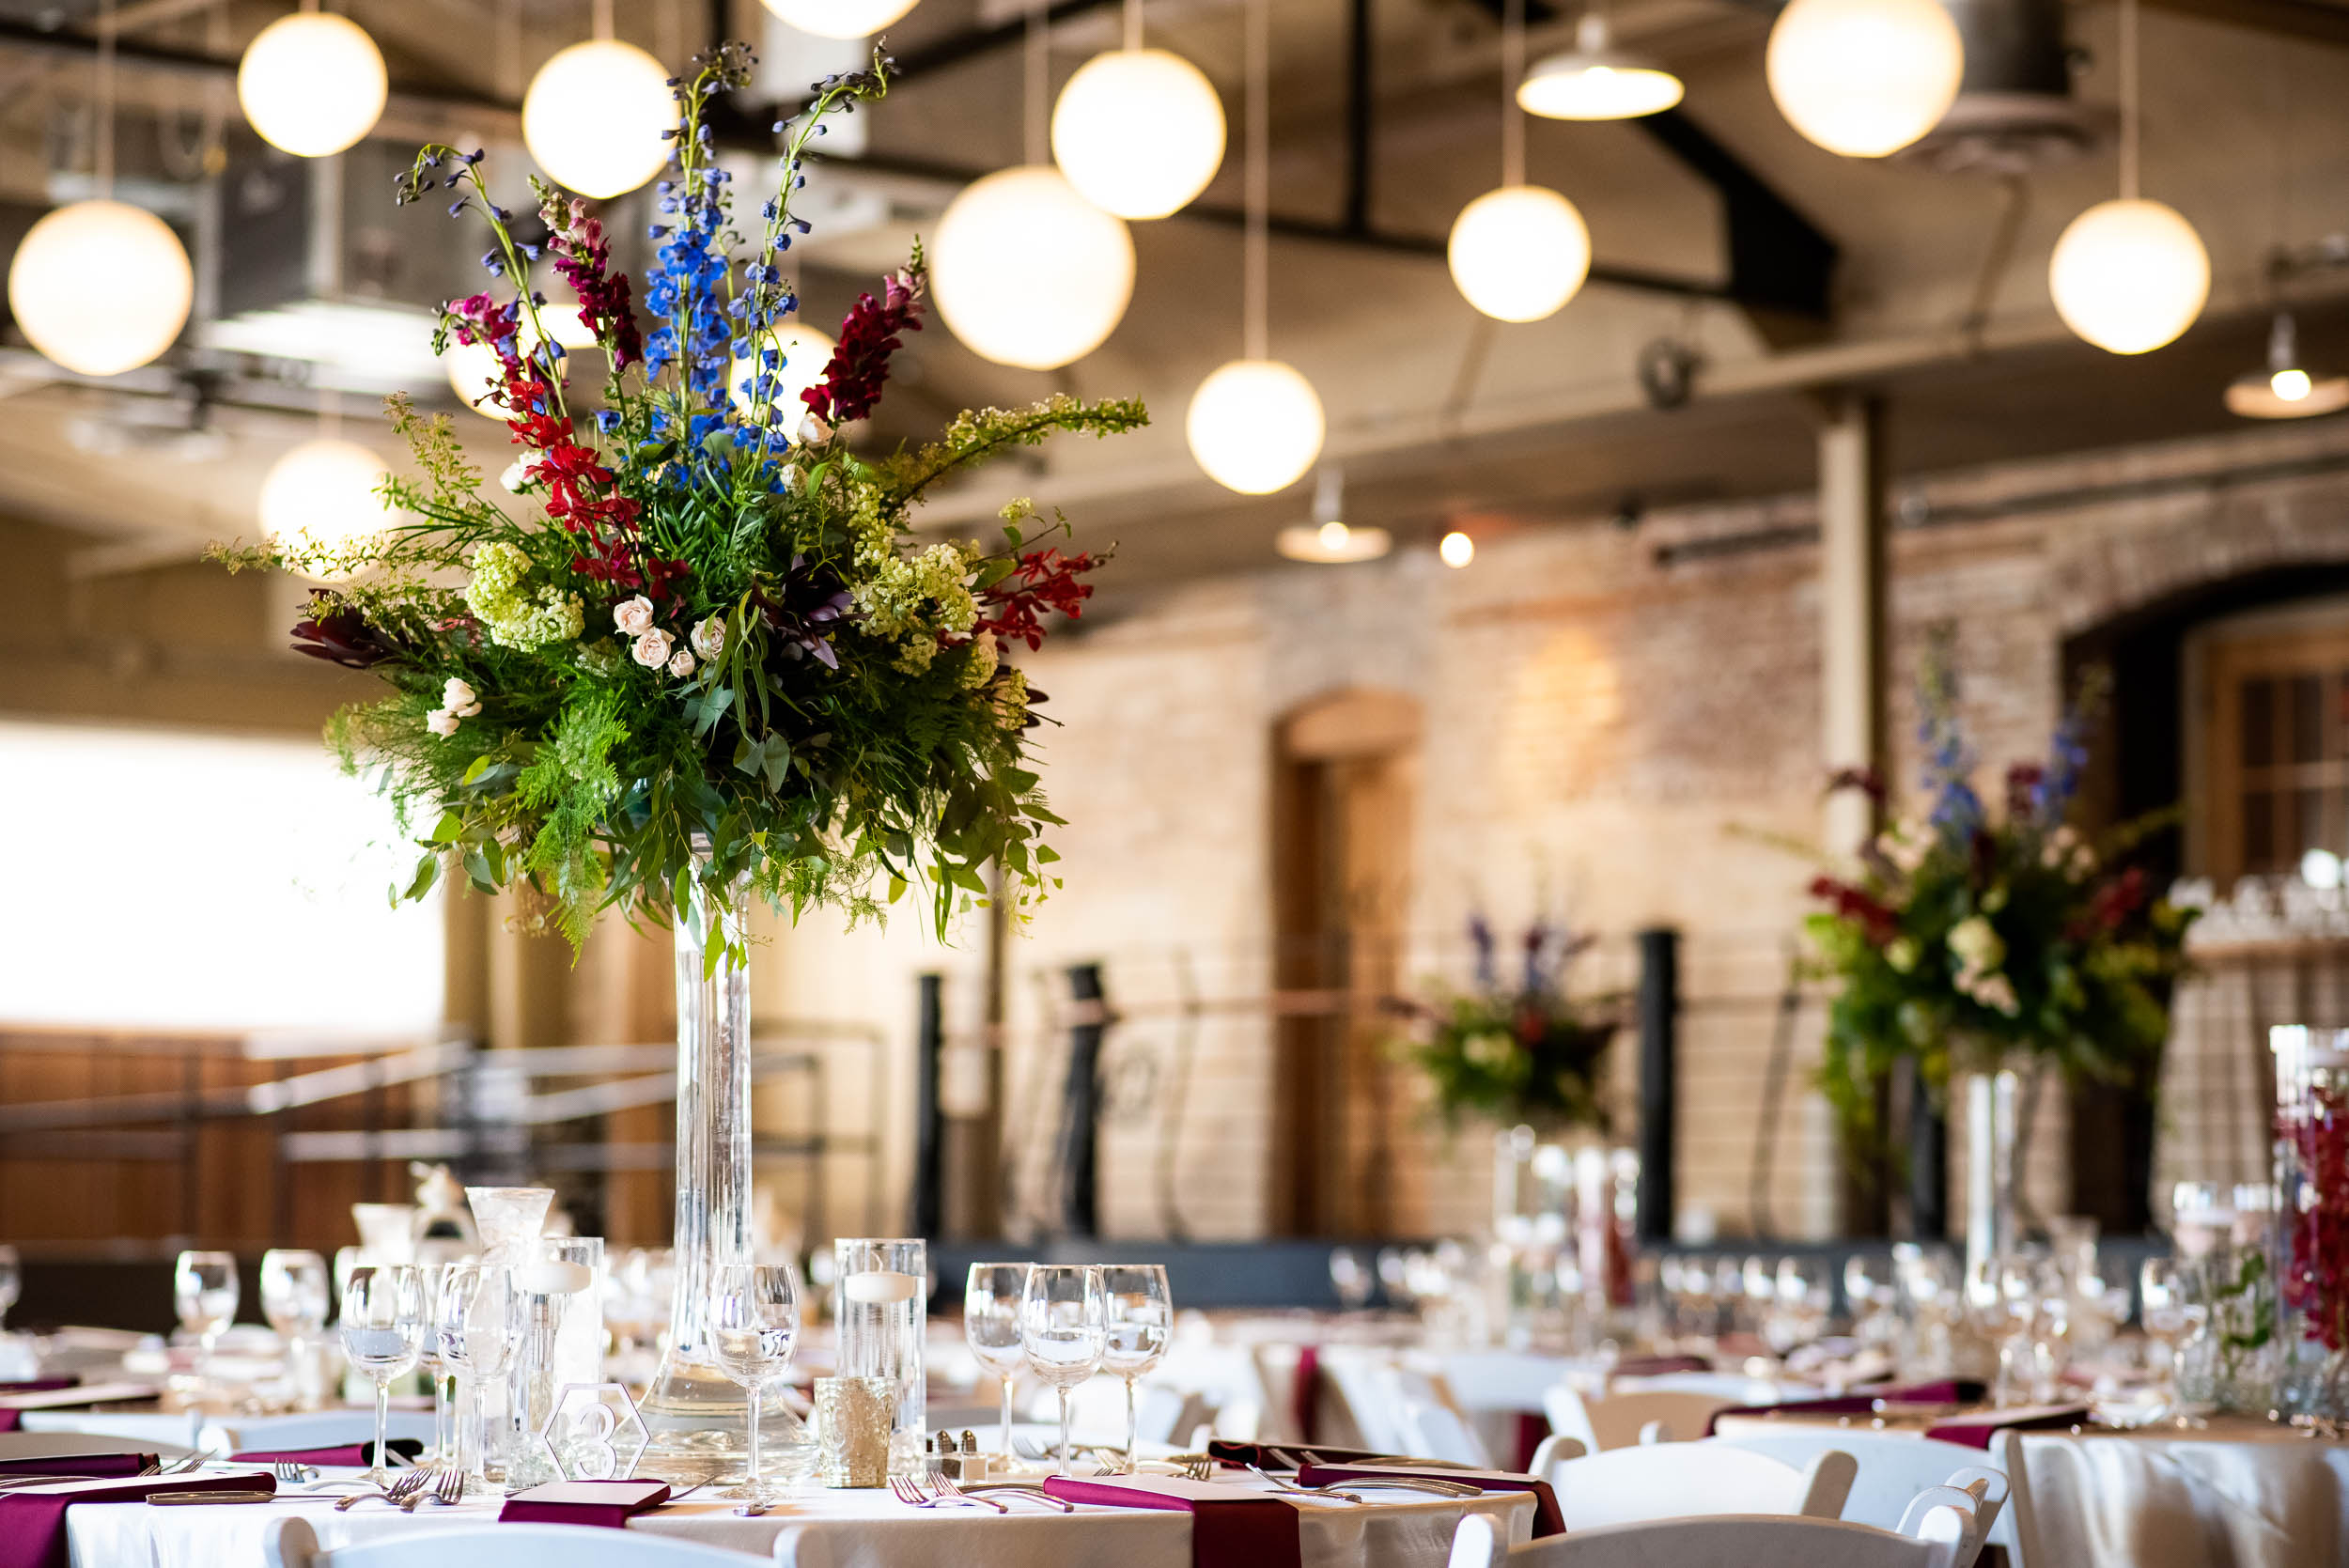 Wedding reception decor: Modern industrial Chicago wedding inside Prairie Street Brewhouse captured by J. Brown Photography. Find more wedding ideas at jbrownphotography.com!